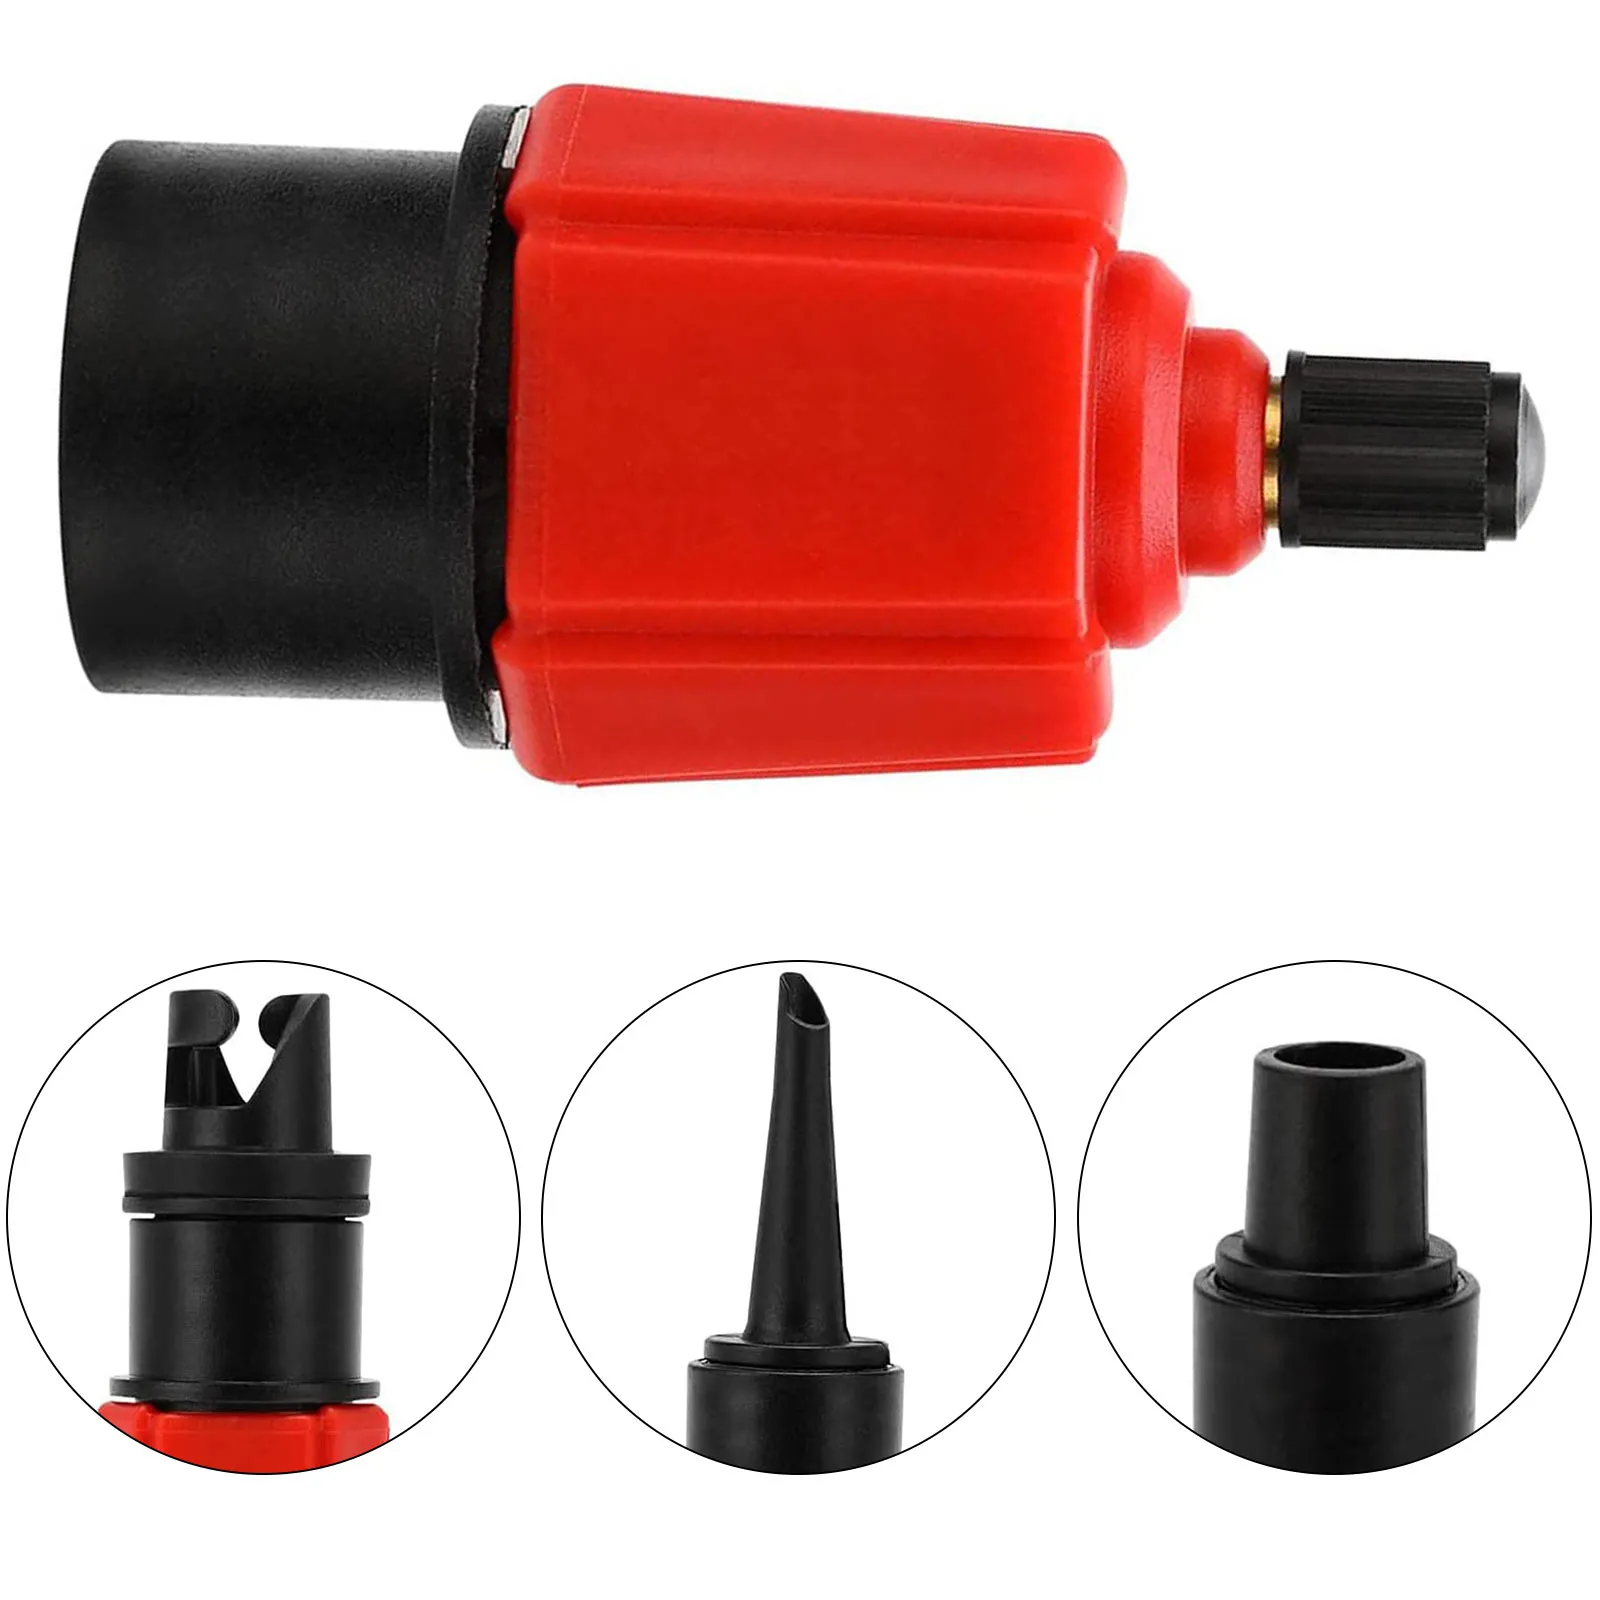 Sup Air Pump Adapter Inflatable Paddle Rubber Boat Kayak Air Valve Adaptor Tire Compressor Converter with 4 Nozzle for SUP Board